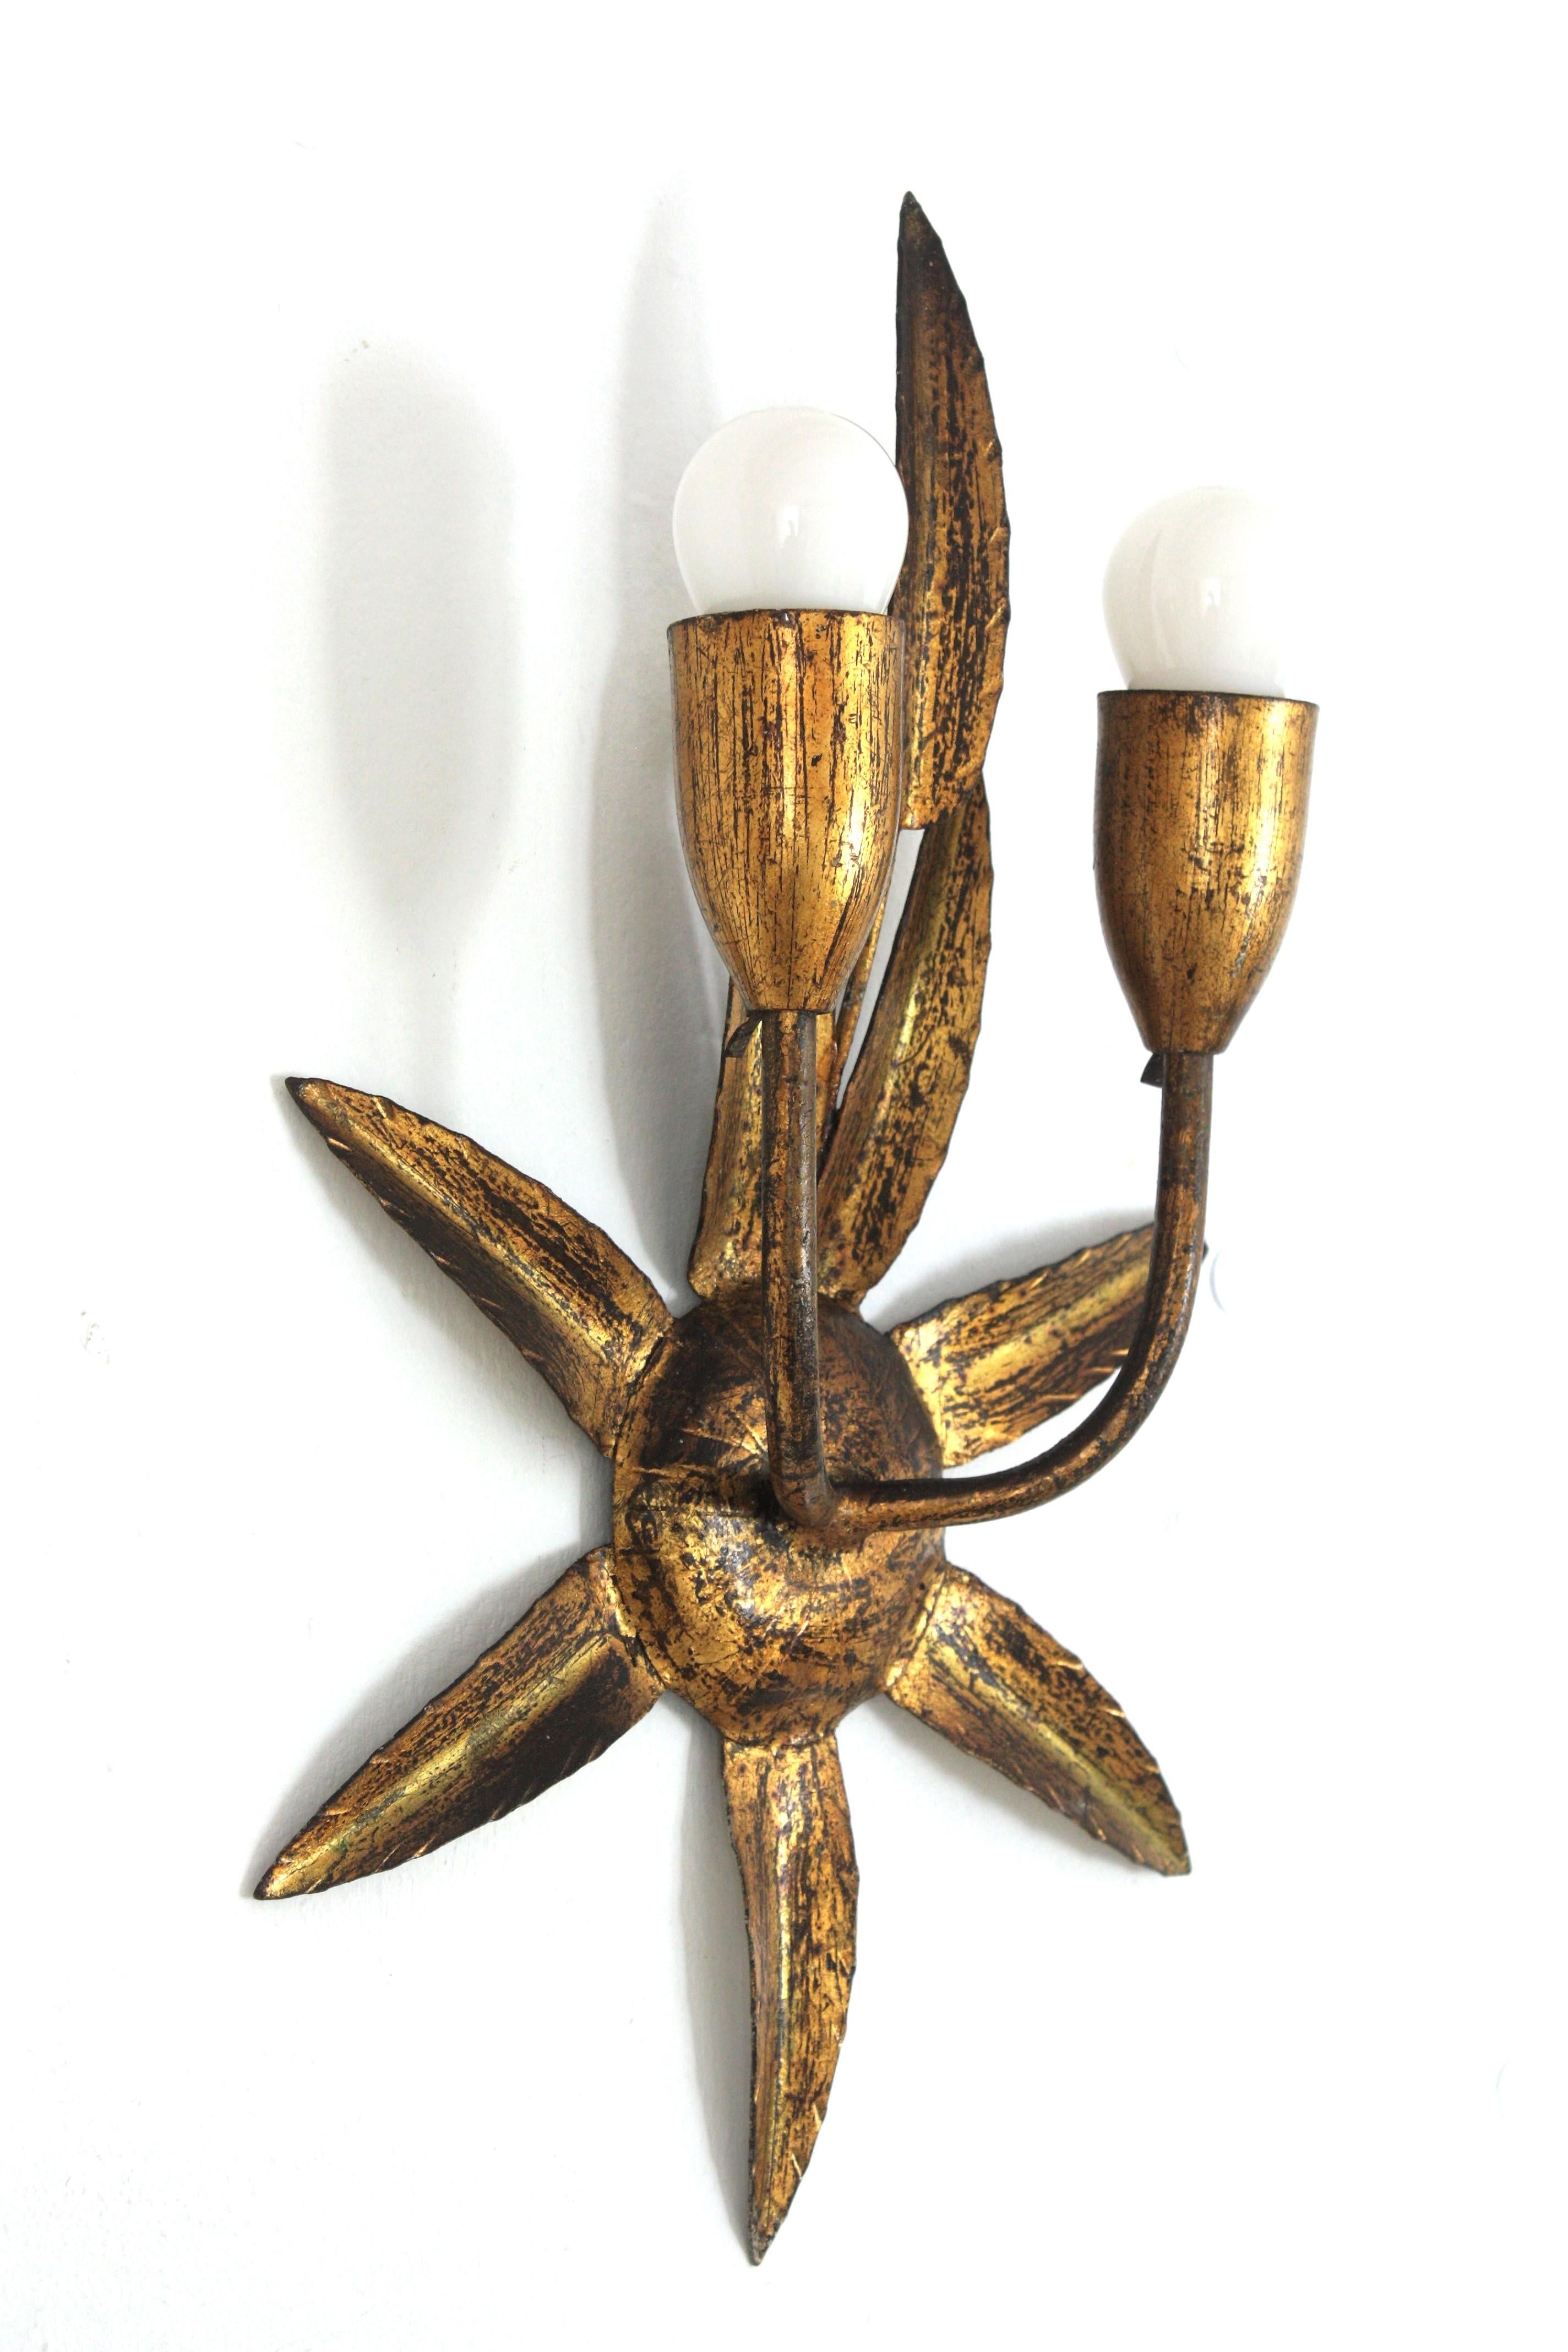 Metal Spanish Gilt Iron Wall Sconce with Foliage Design and Starburst Backplate, 1950s For Sale